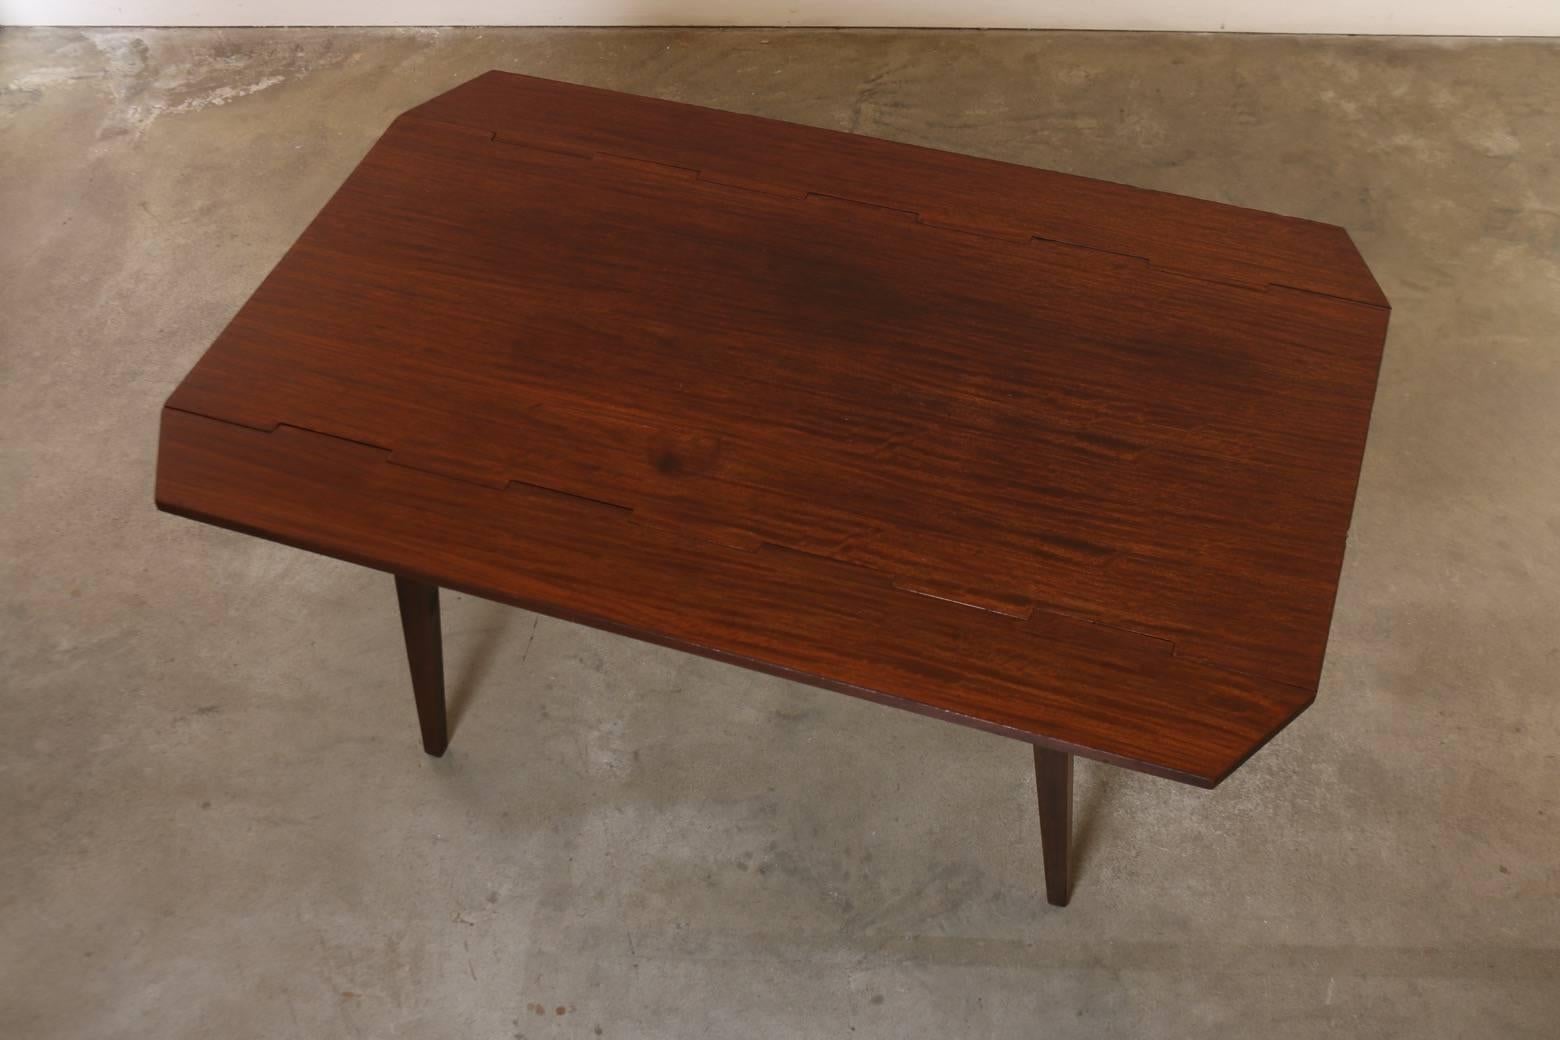 Mid-20th Century Milo Baughman for Drexel Perspective Convertible Dining Table Coffee Table 1950s